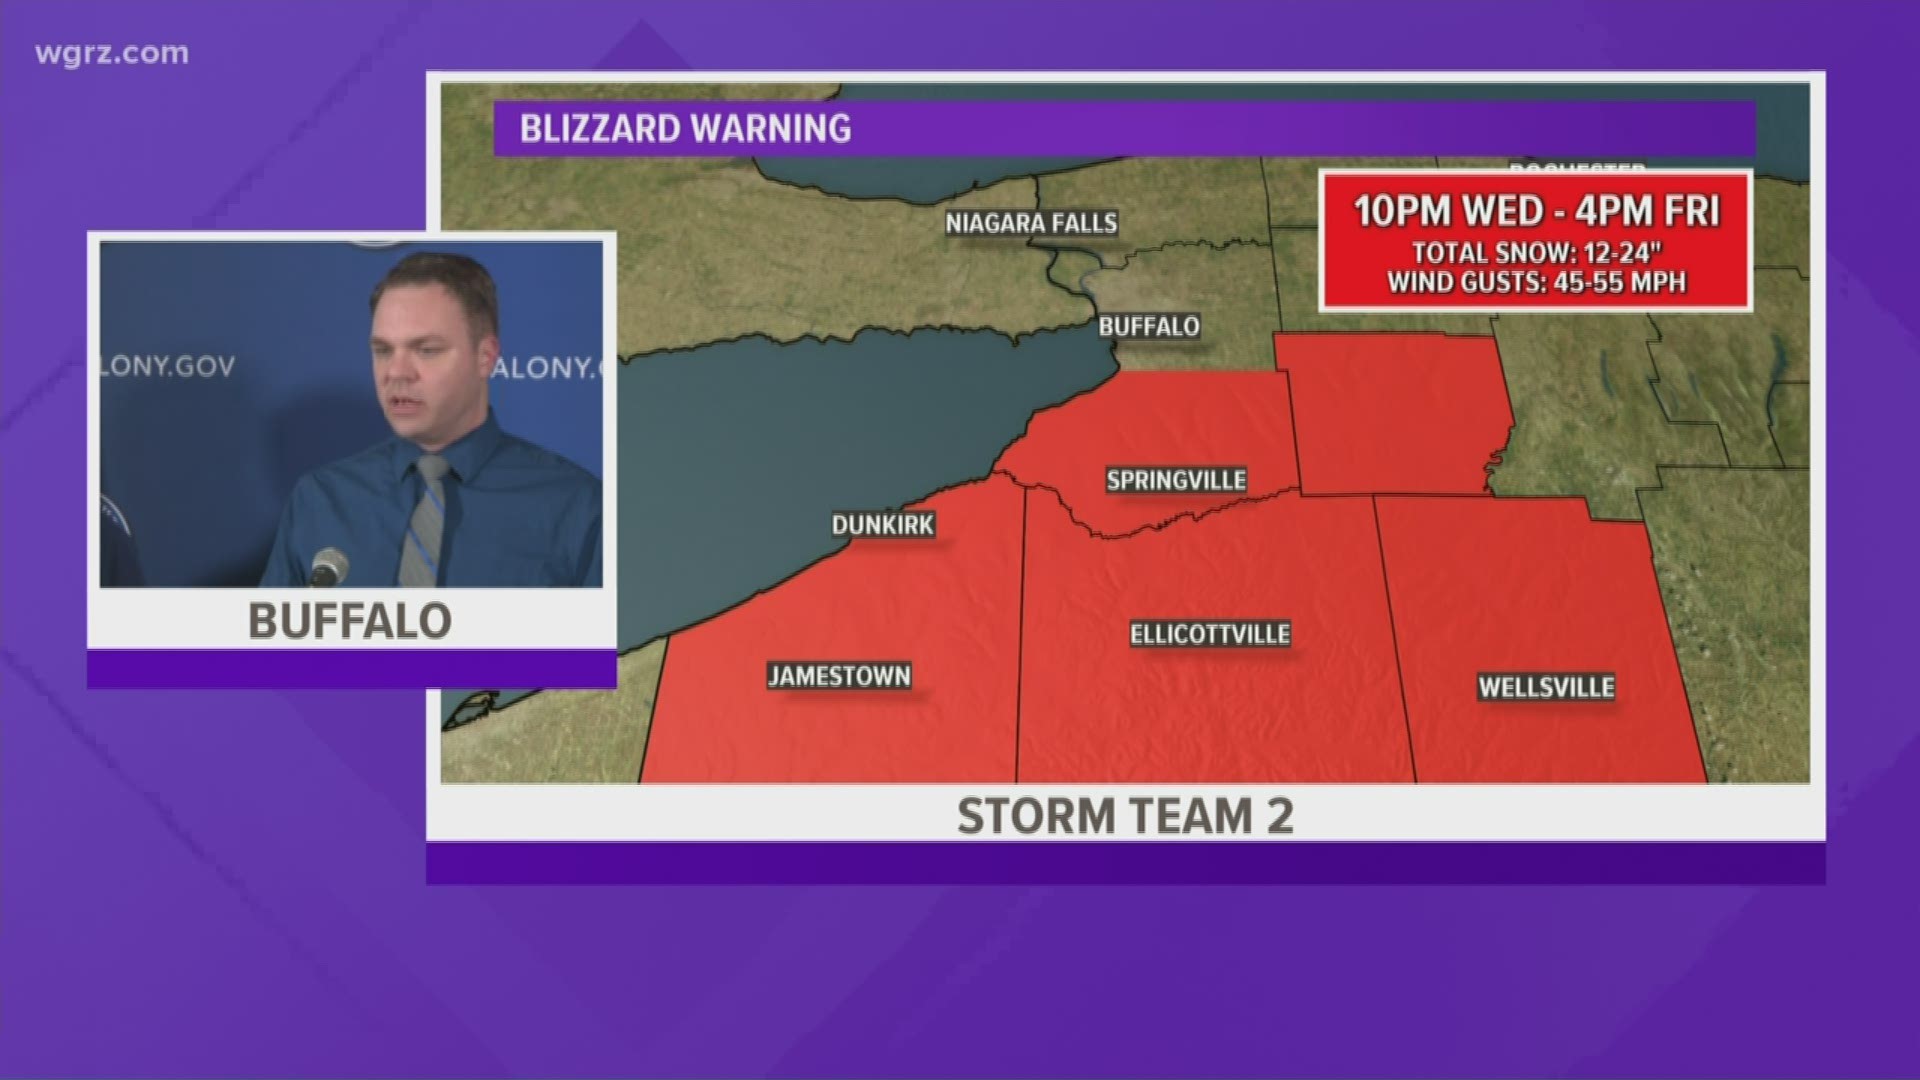 City of Buffalo gives update on weather